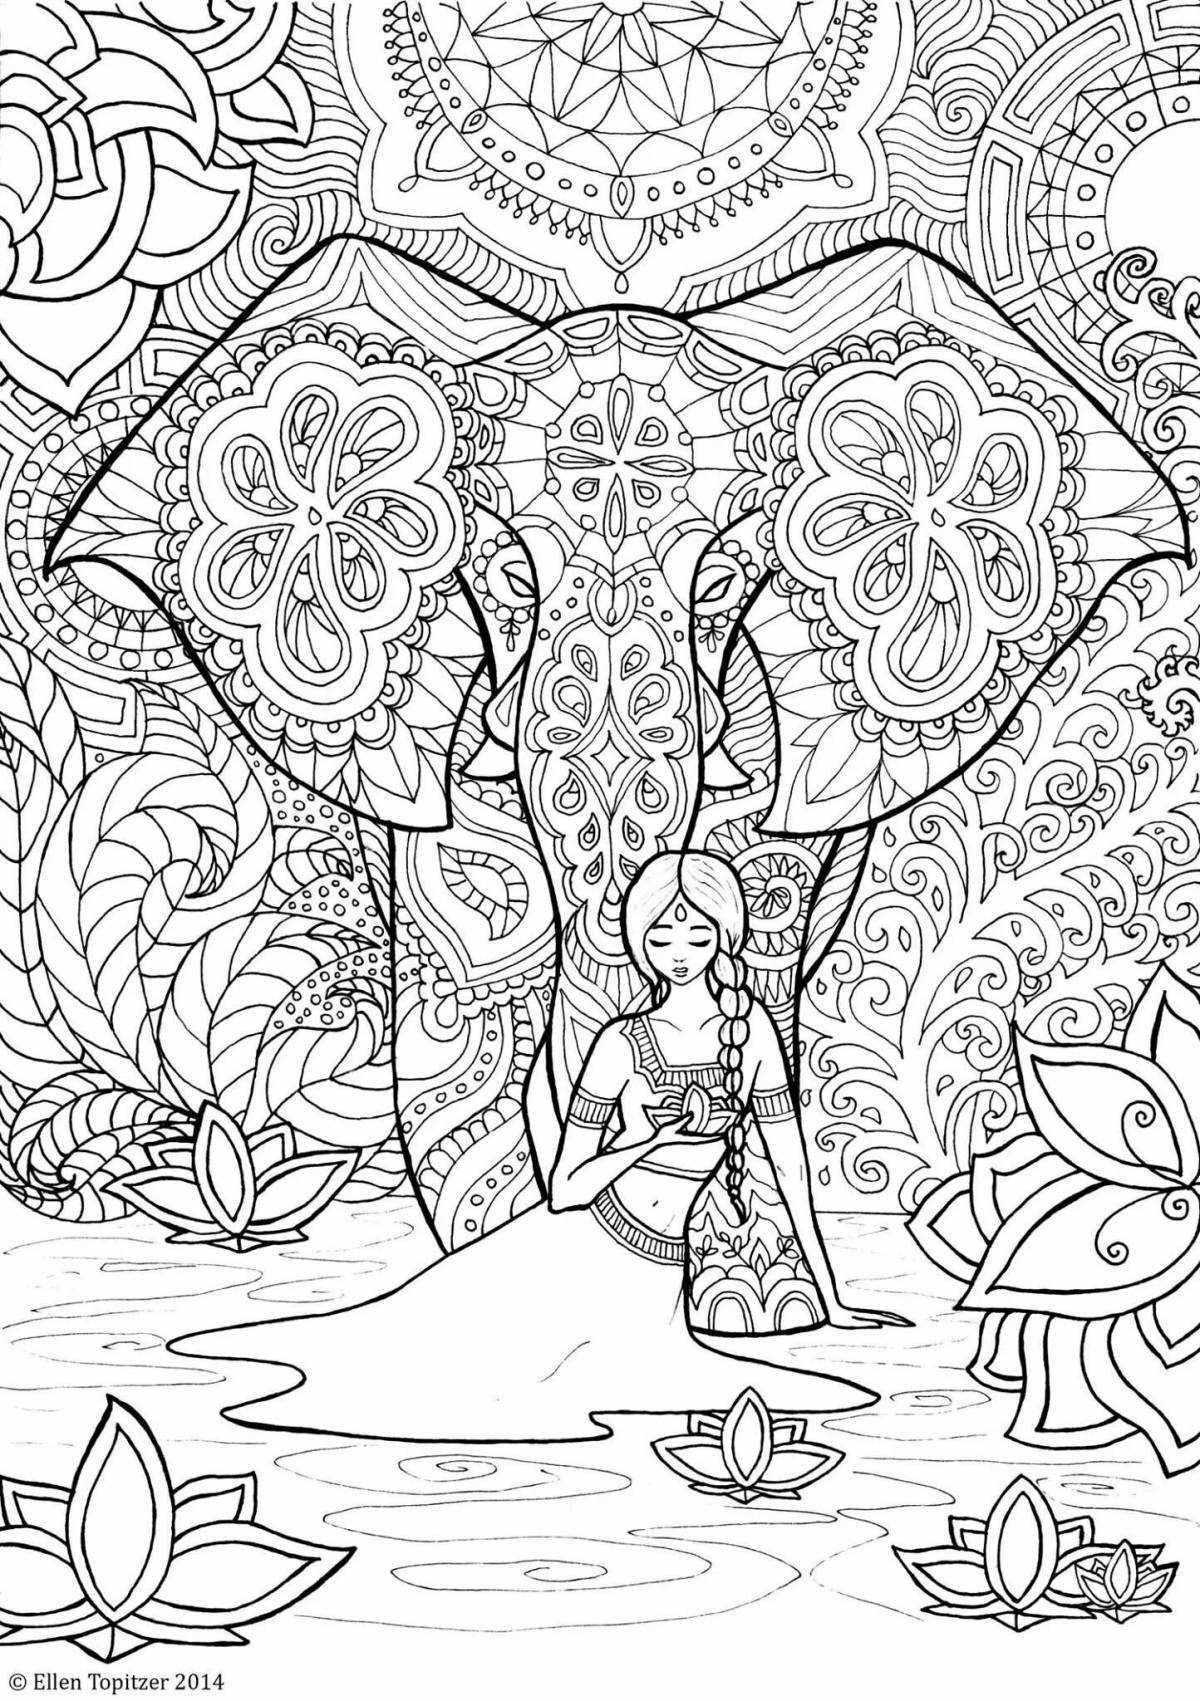 Detailed adult coloring book